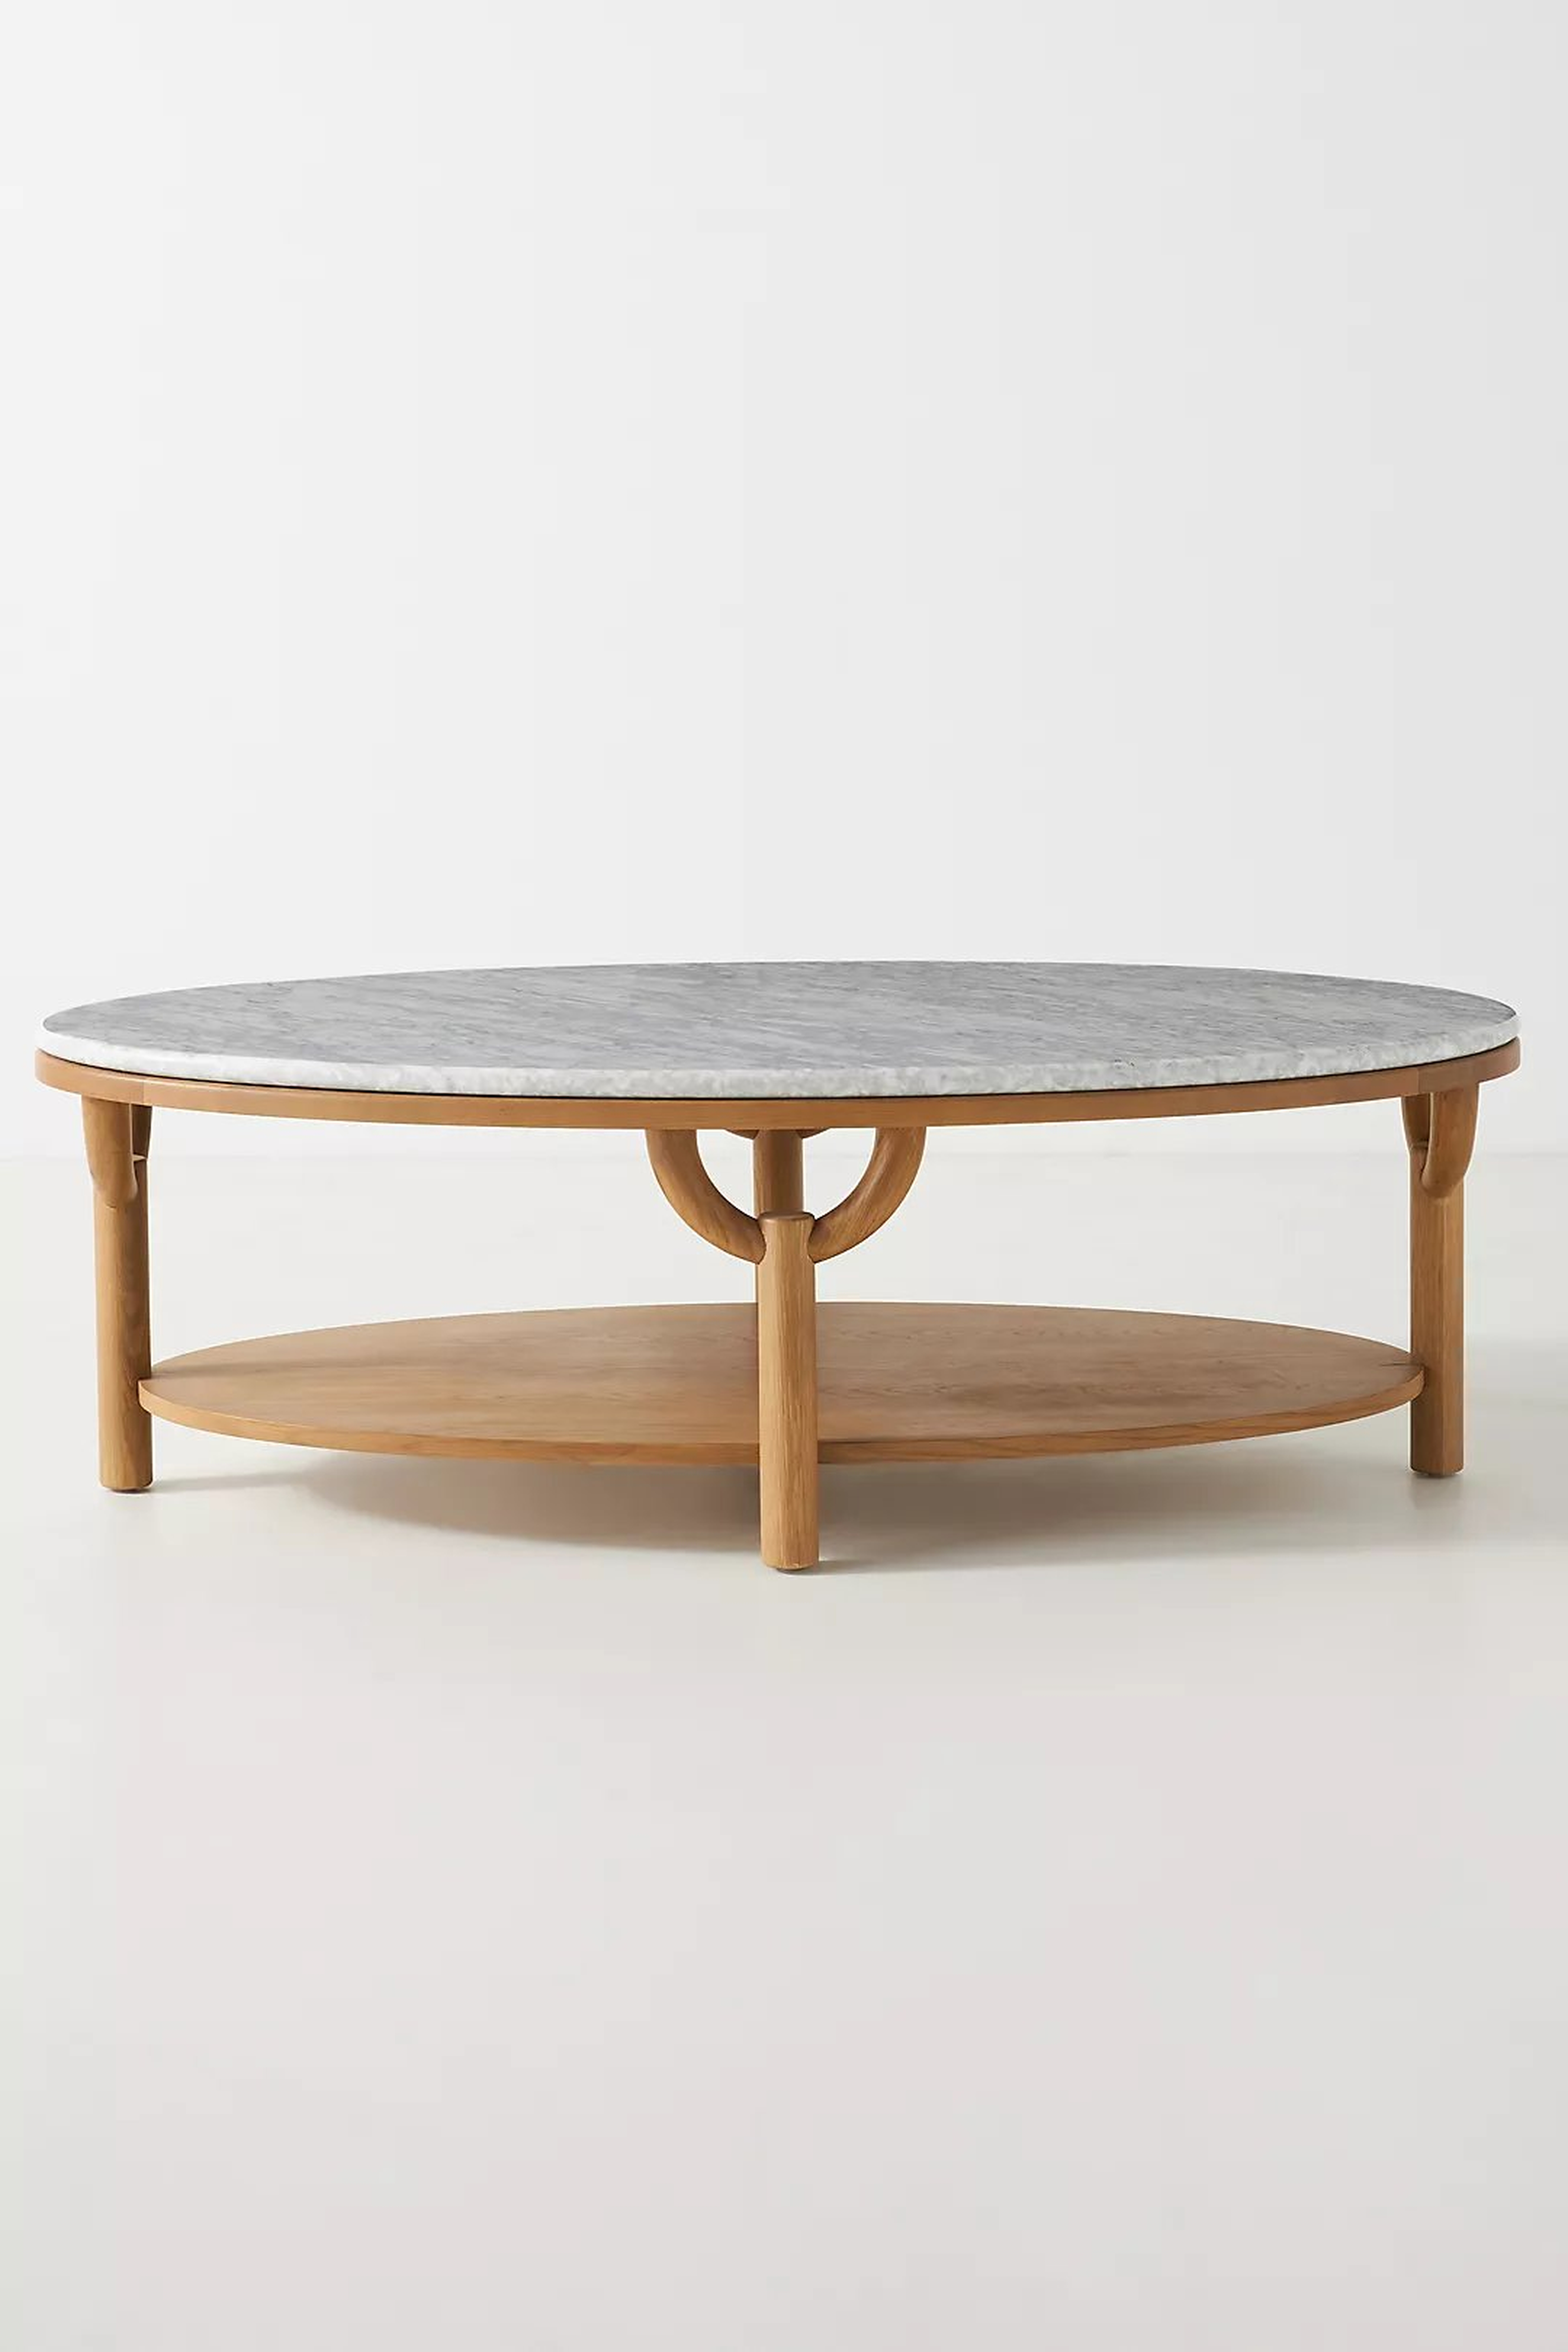 Arches Oval Coffee Table, Beige - Anthropologie